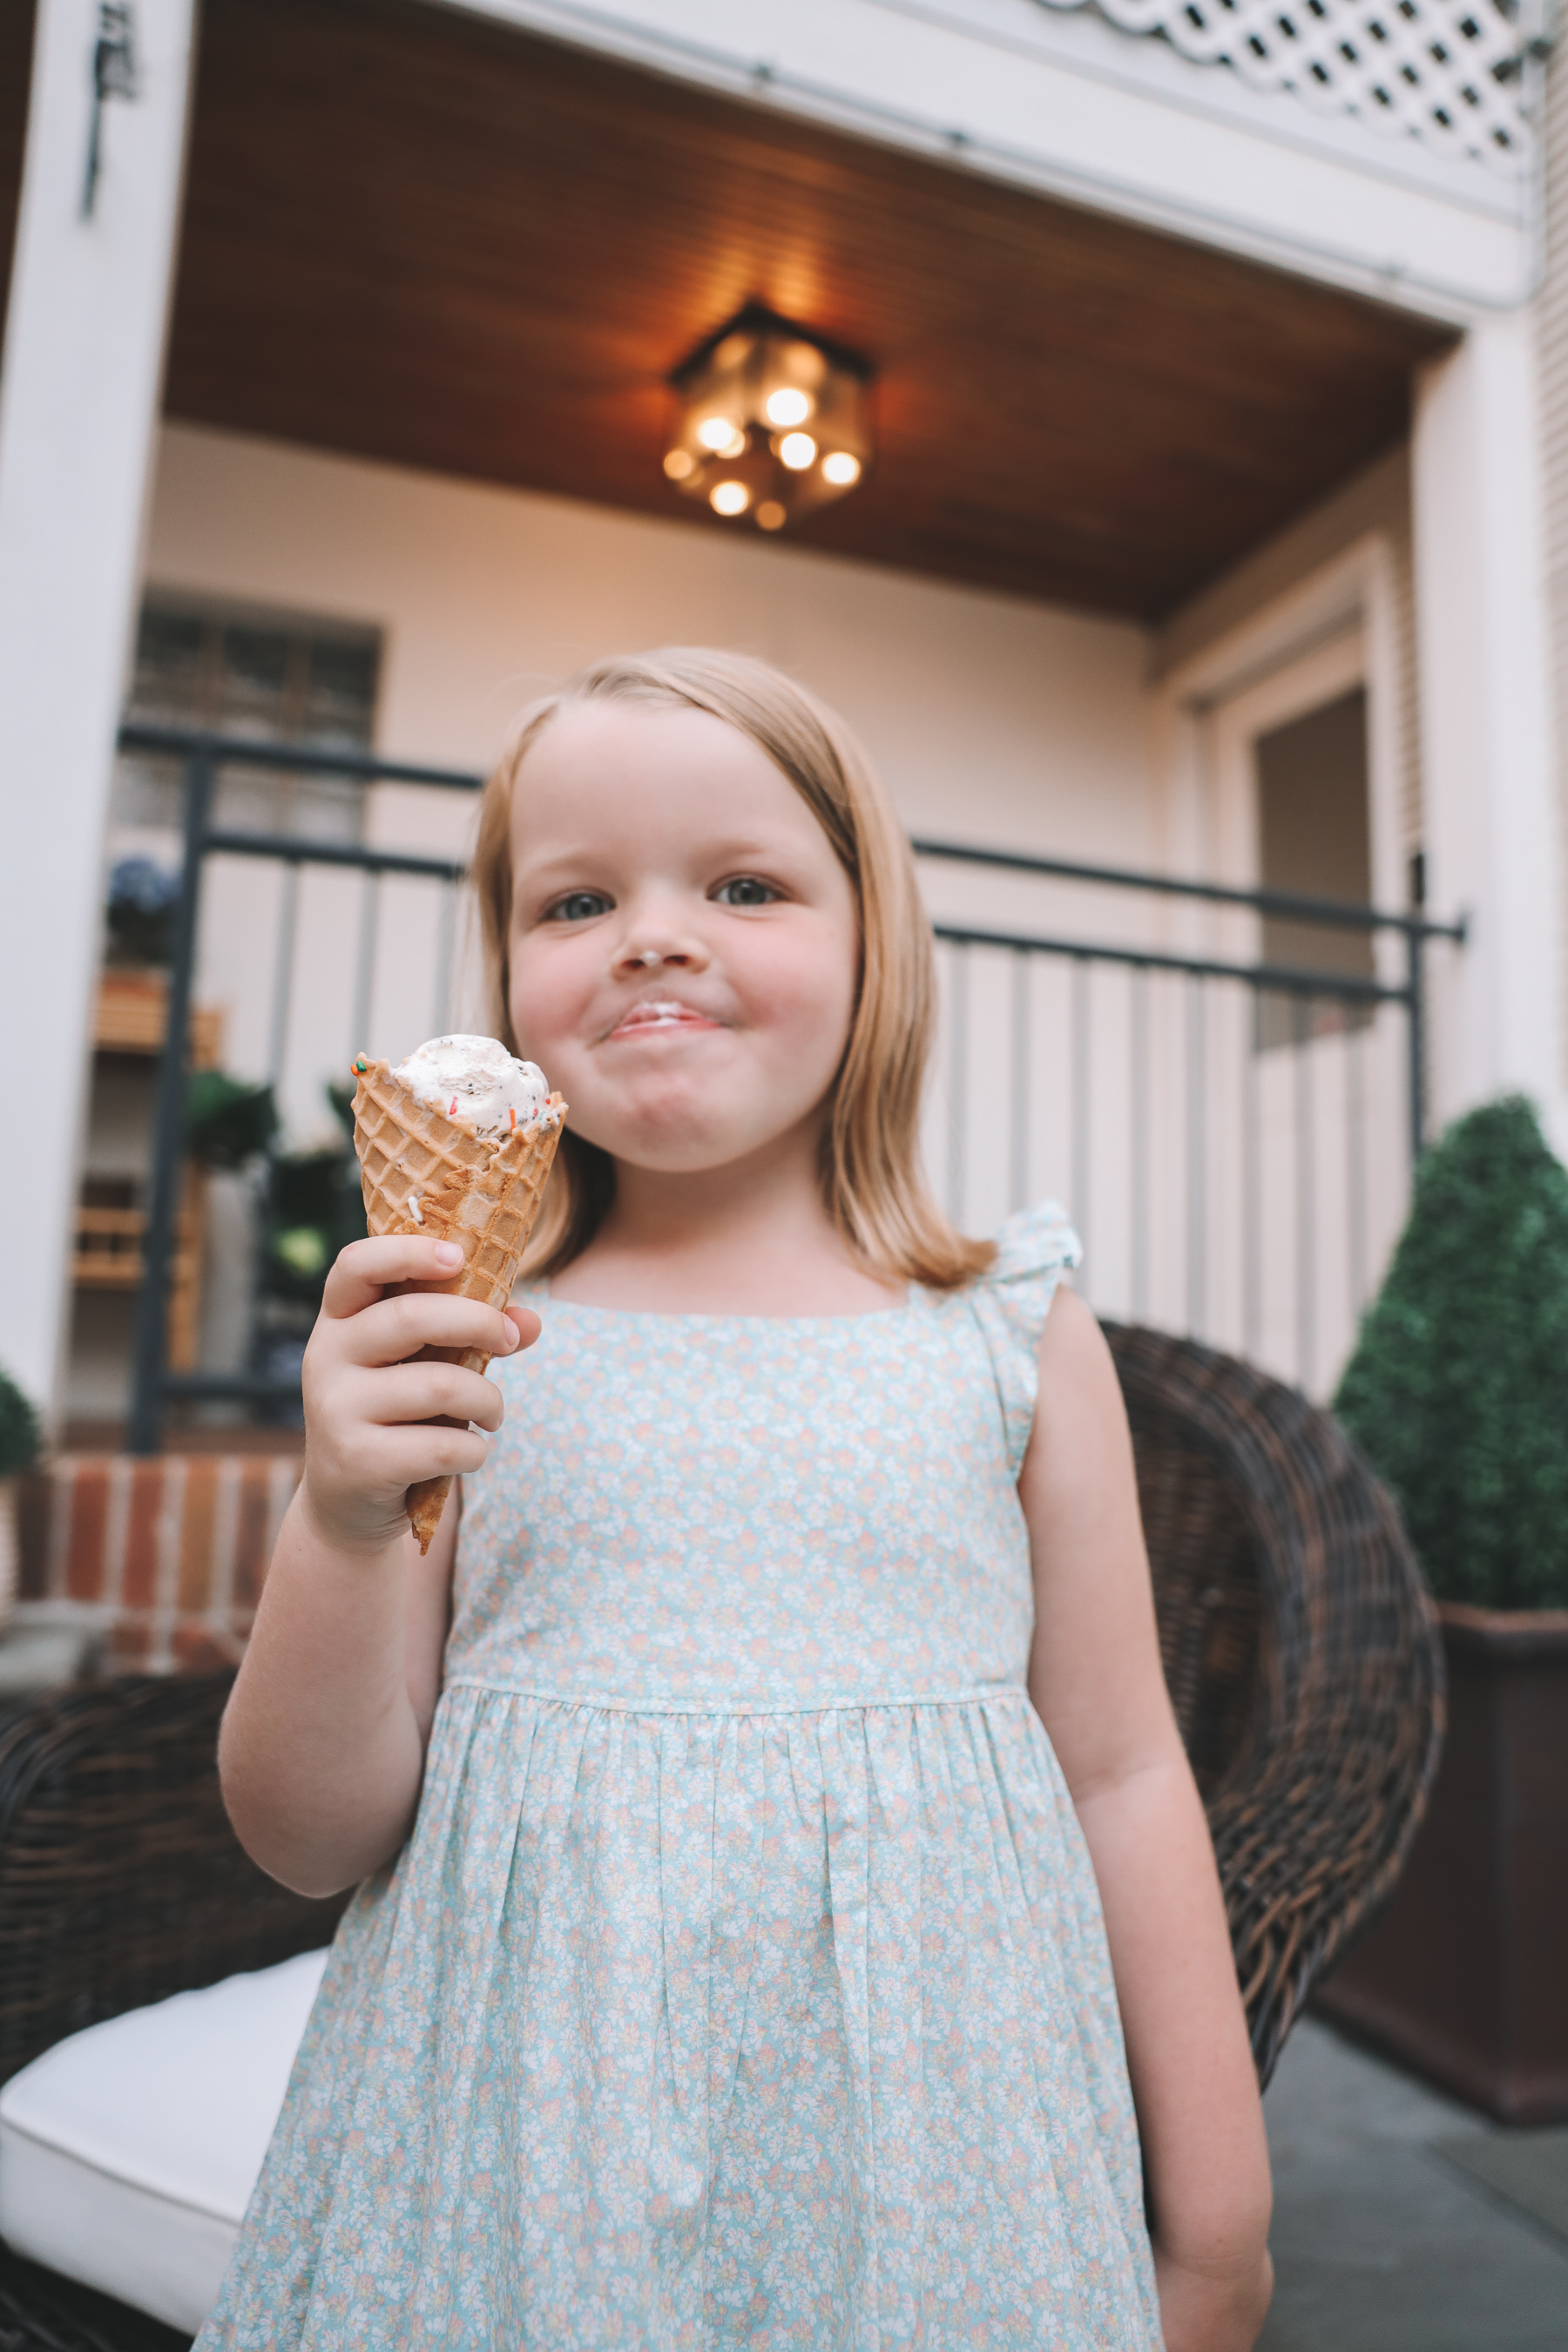 Toddler Favorite Day Ice Cream Review